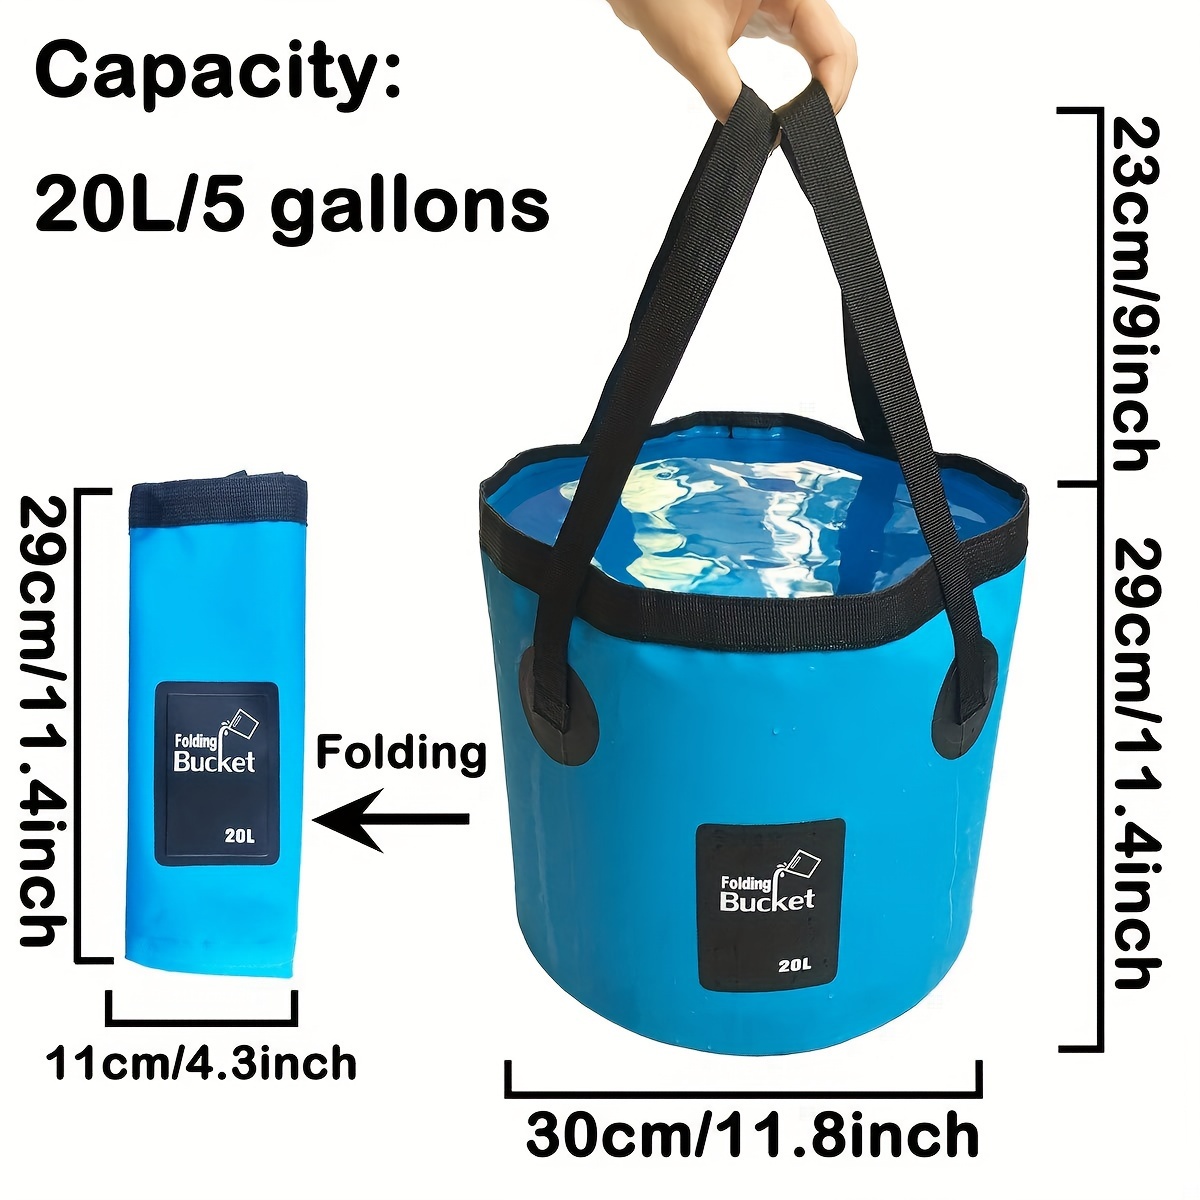 Tessco Collapsible Bucket with Handle Collapsible Sink Camping 5